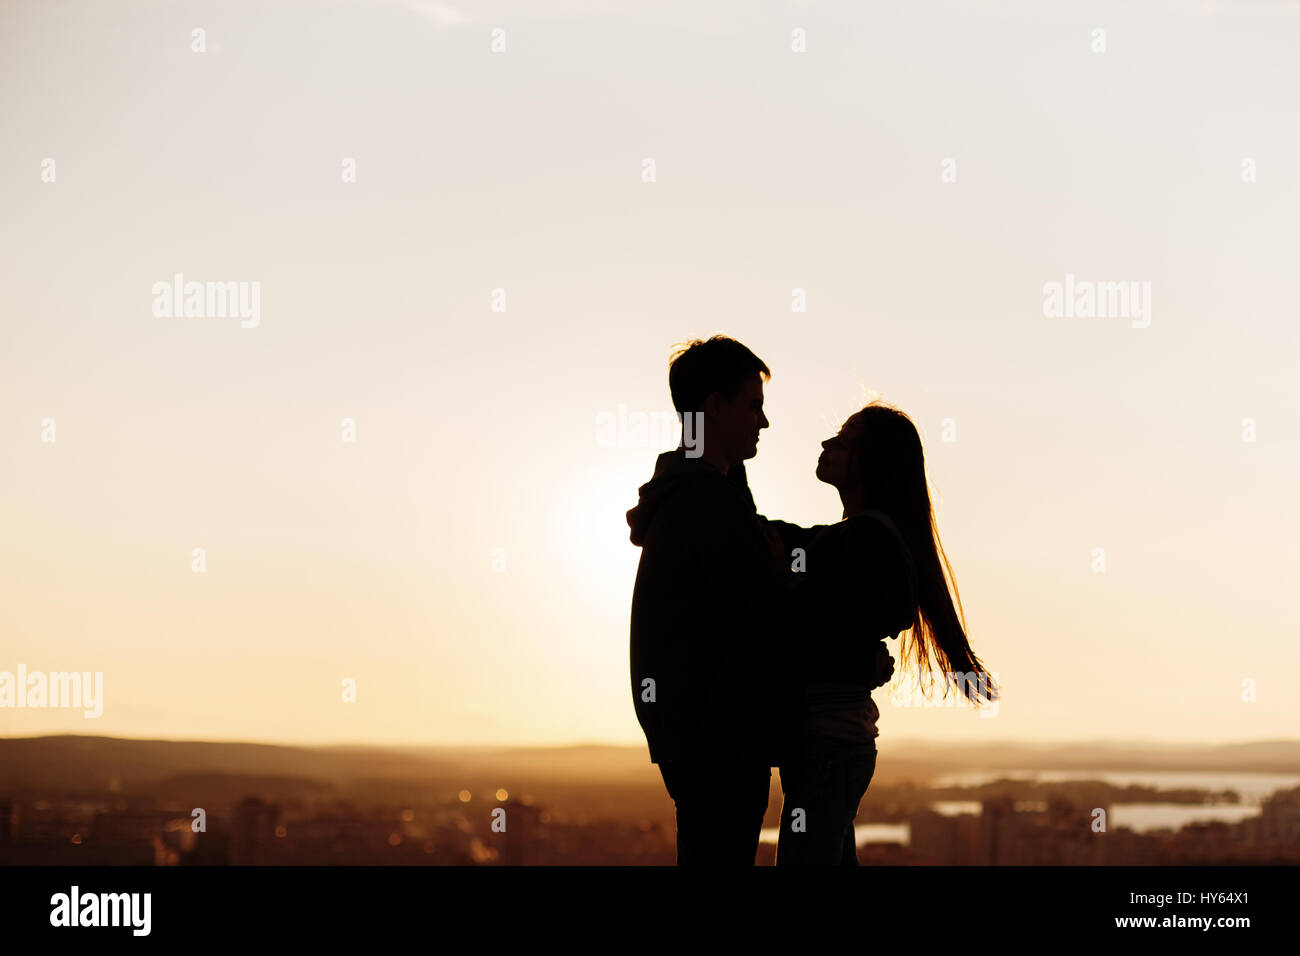 Couple embracing on a roof at the sunset, silhouette Stock Photo